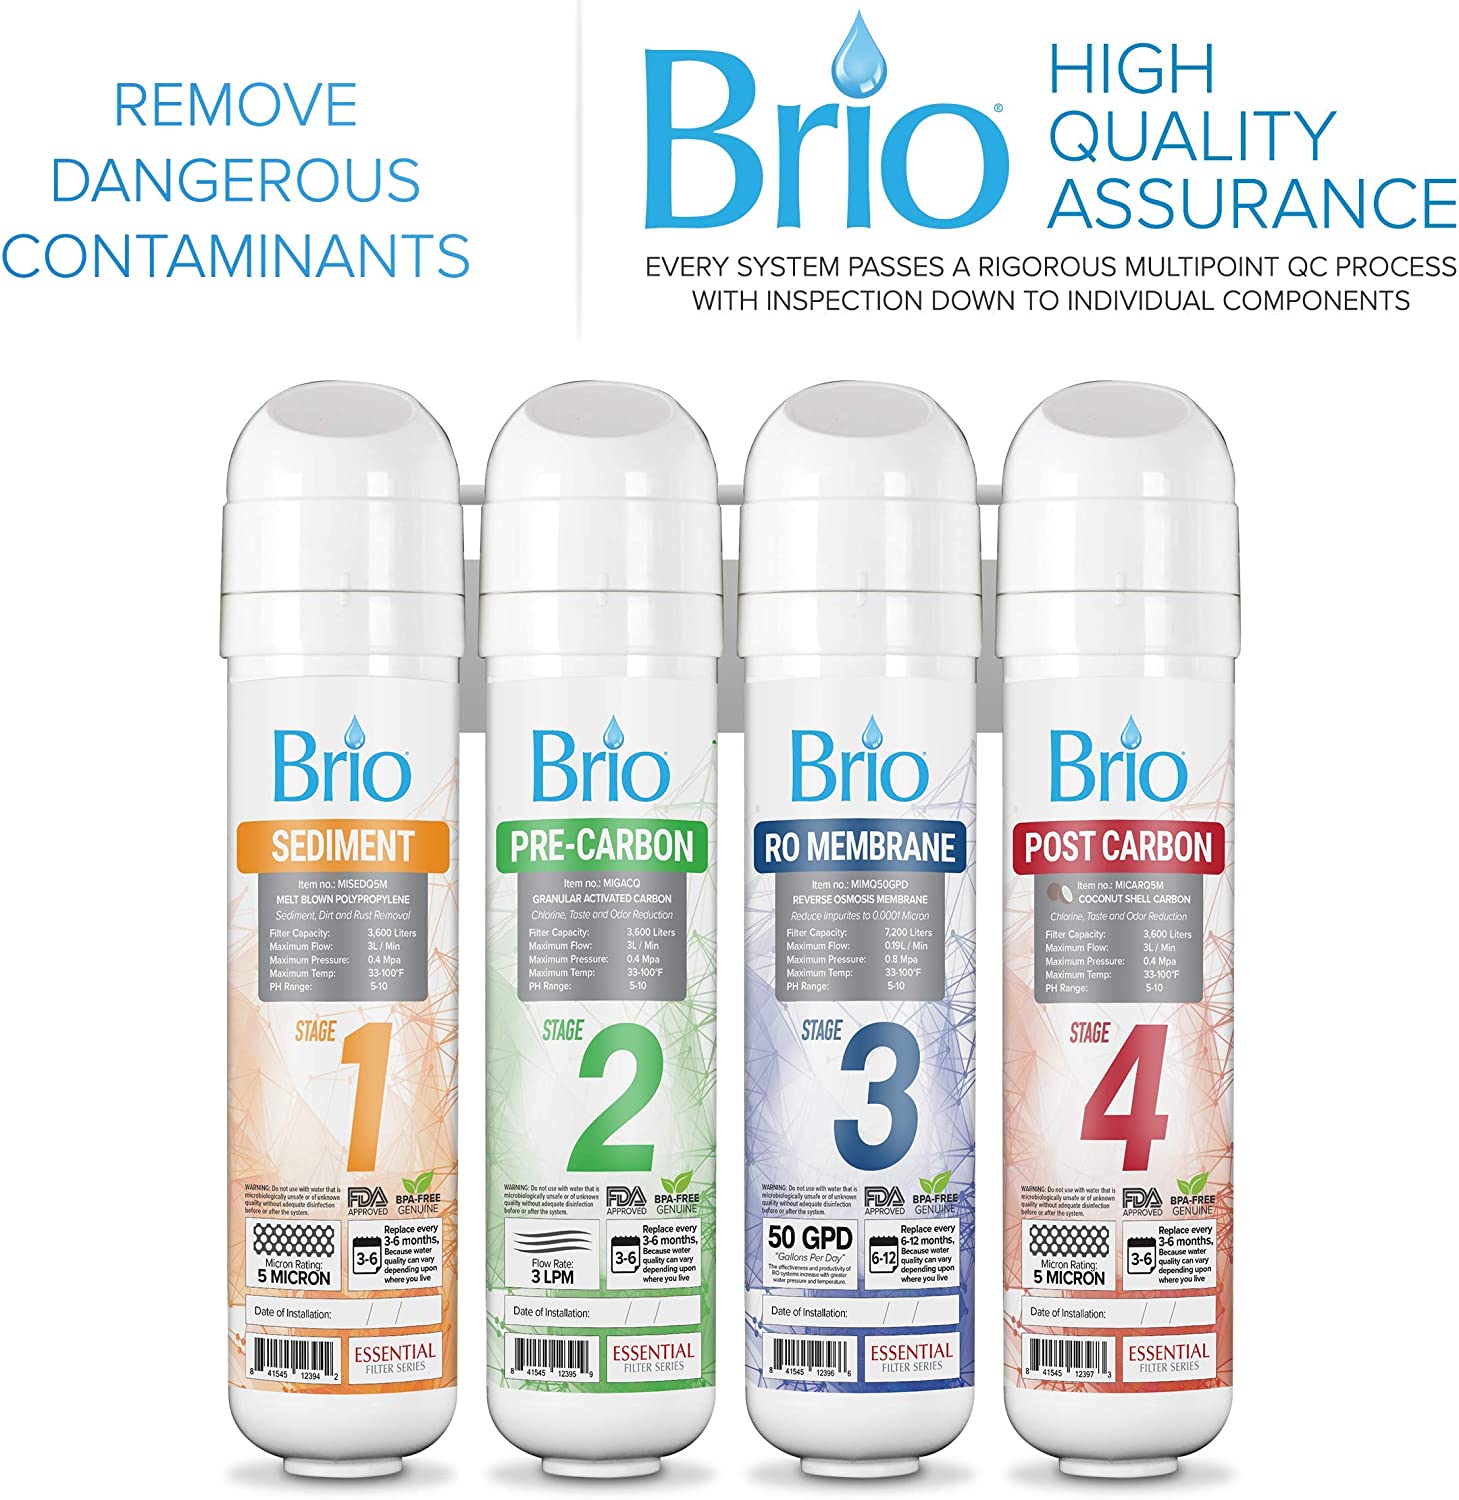 Brio Commercial Grade Bottleless Ultra Safe Reverse Osmosis Water Cooler(DOES NOT USE JUGS)  - $180